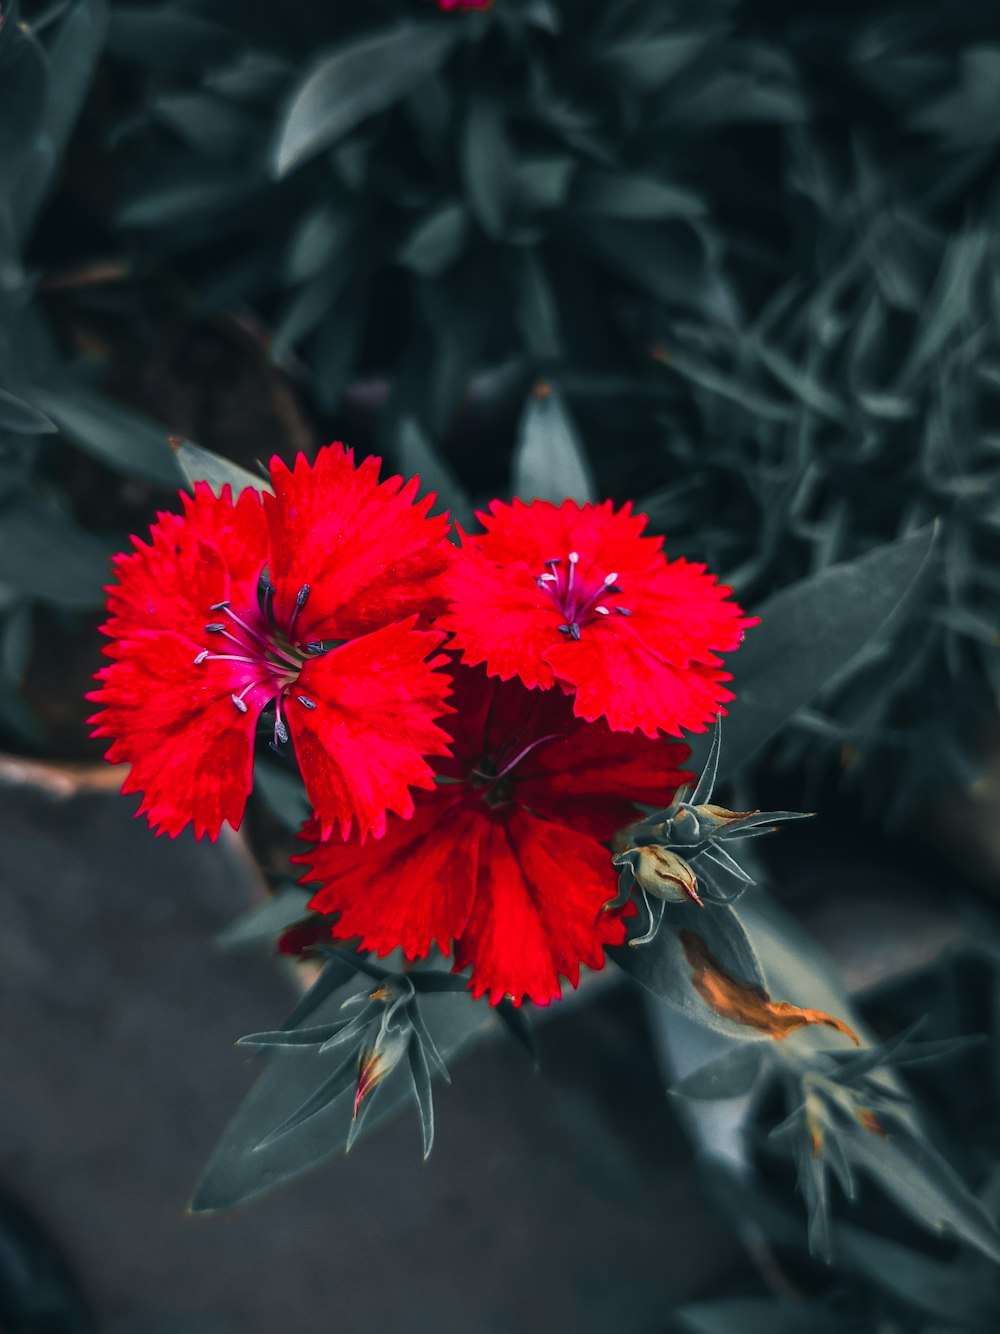 A close up of a red flower on a plant photo – Free Momen rahman ...